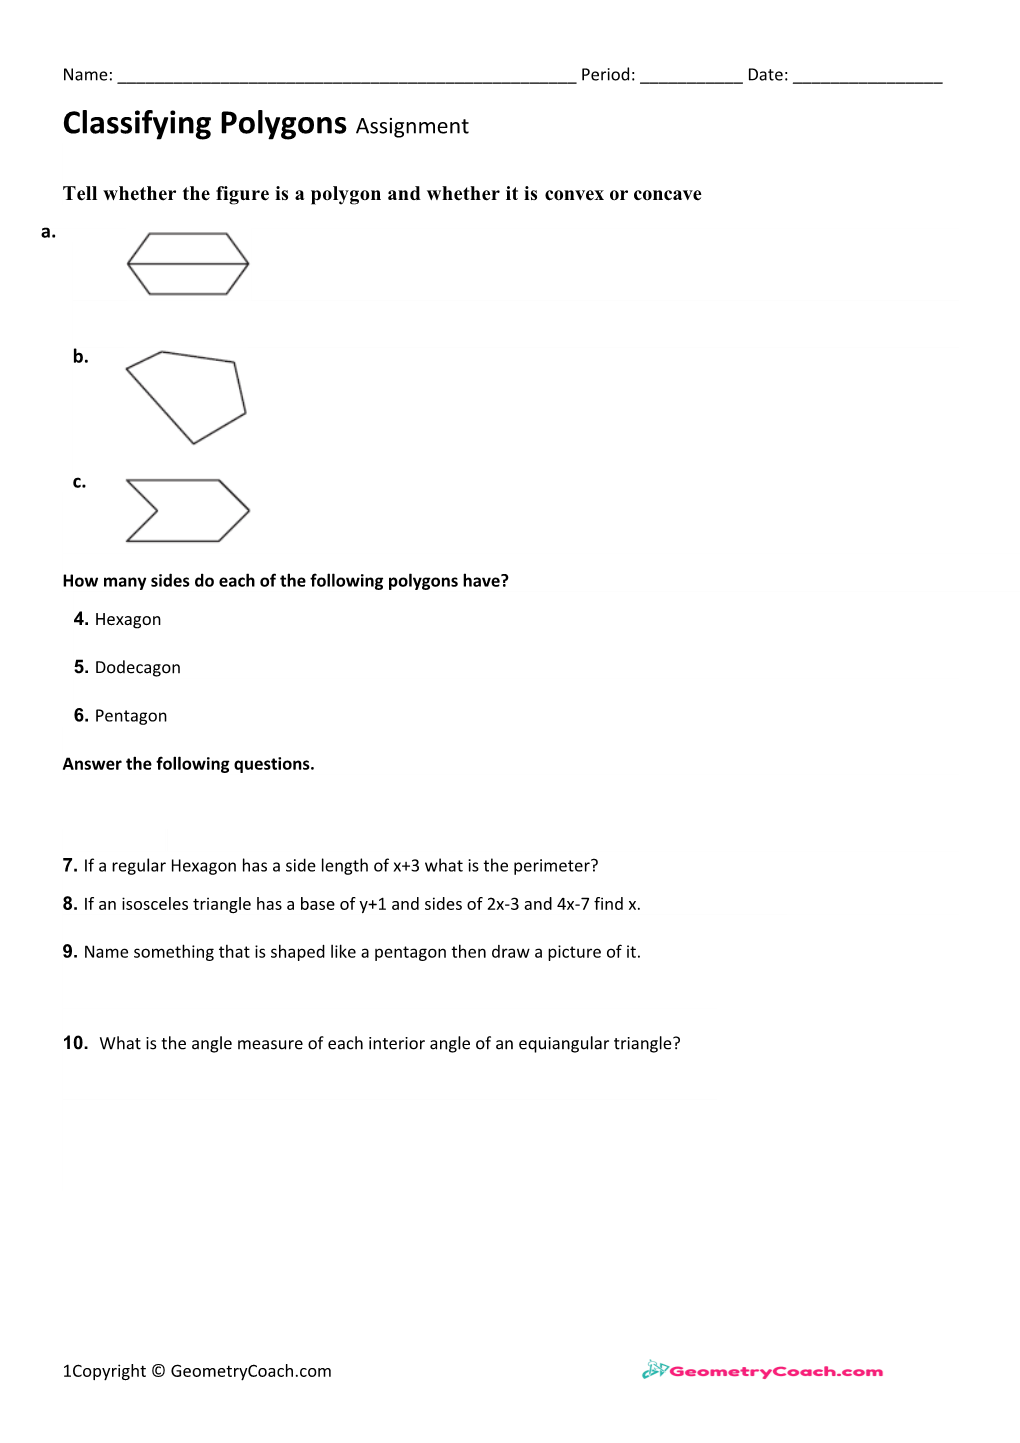 Tell Whether the Figure Is a Polygon and Whether It Is Convex Or Concave